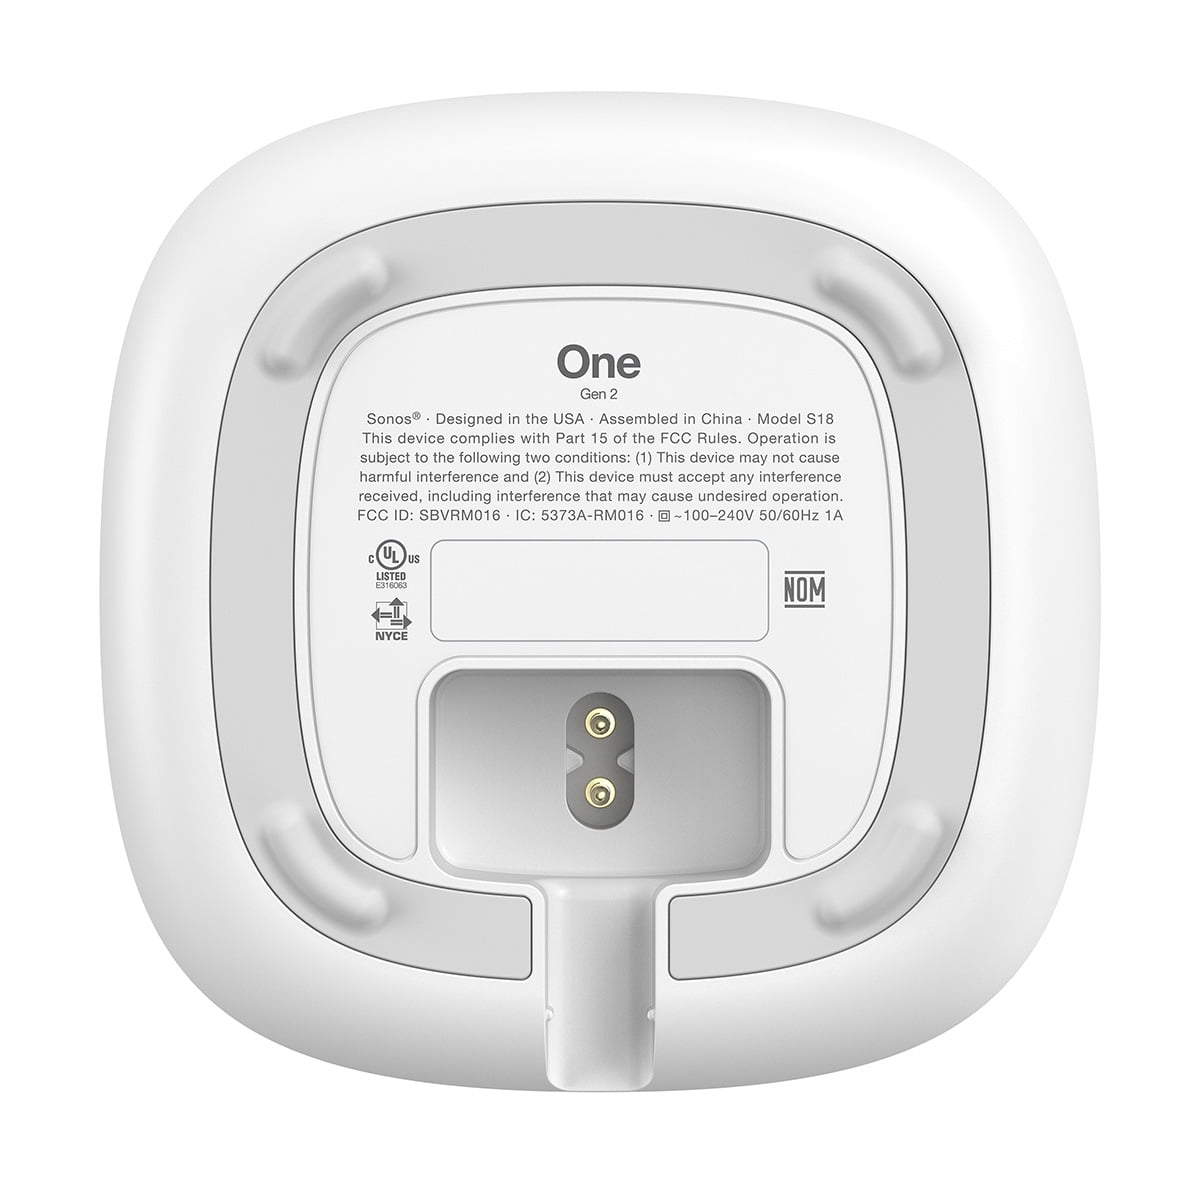 Sonos One 2) - Controlled Smart with Amazon Alexa Built-in (White) - Walmart.com